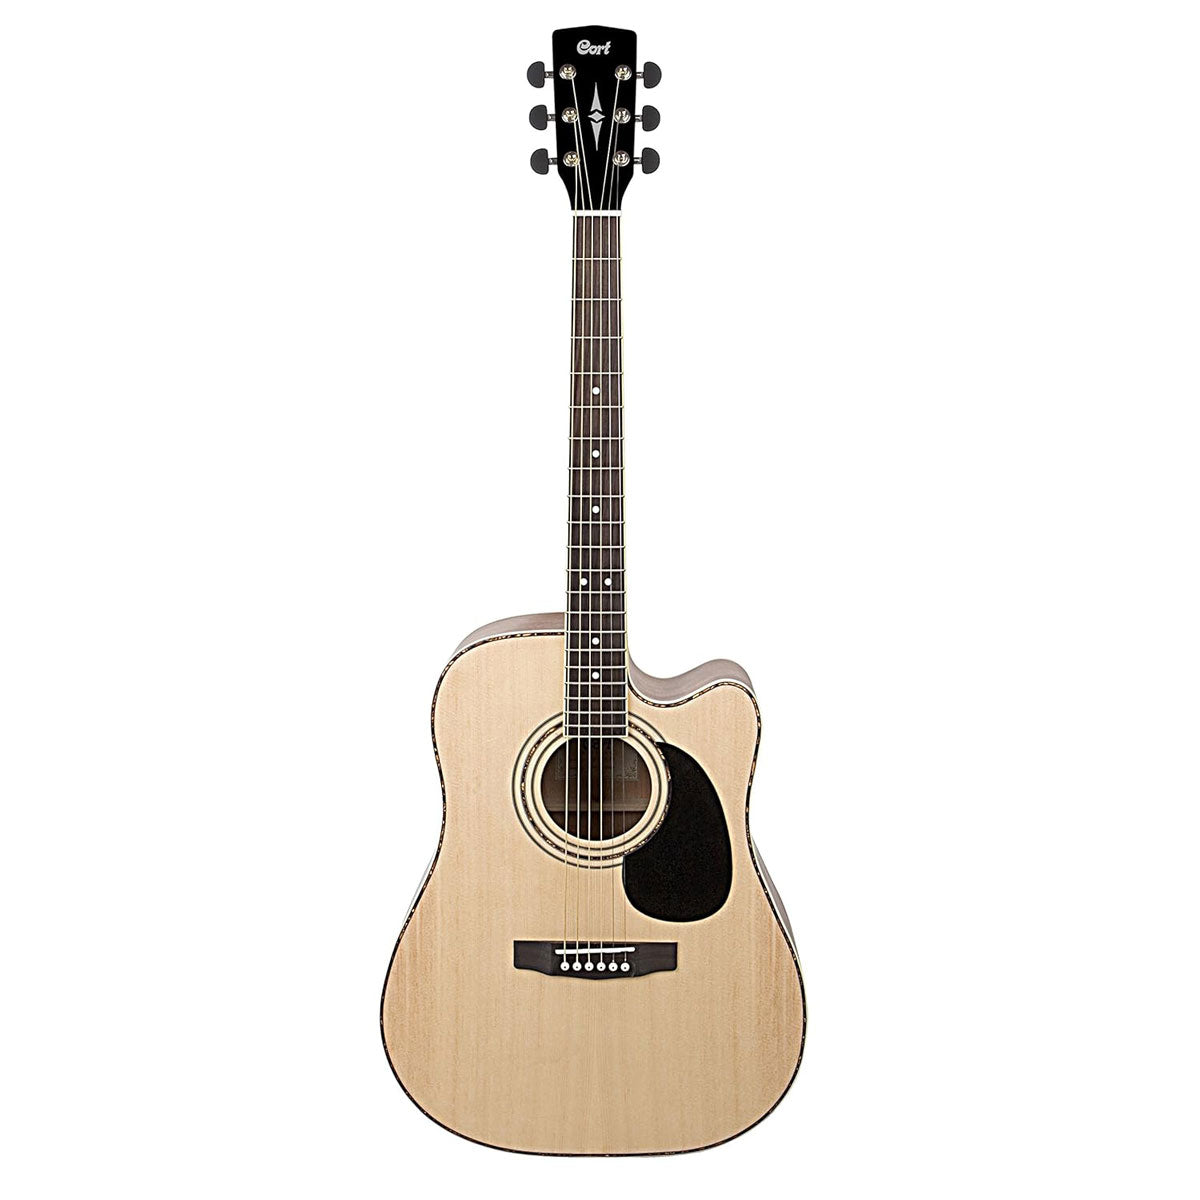 Cort AD880 NS, 6 Strings Acoustic Guitar, Right-Handed, Natural Satin, without case